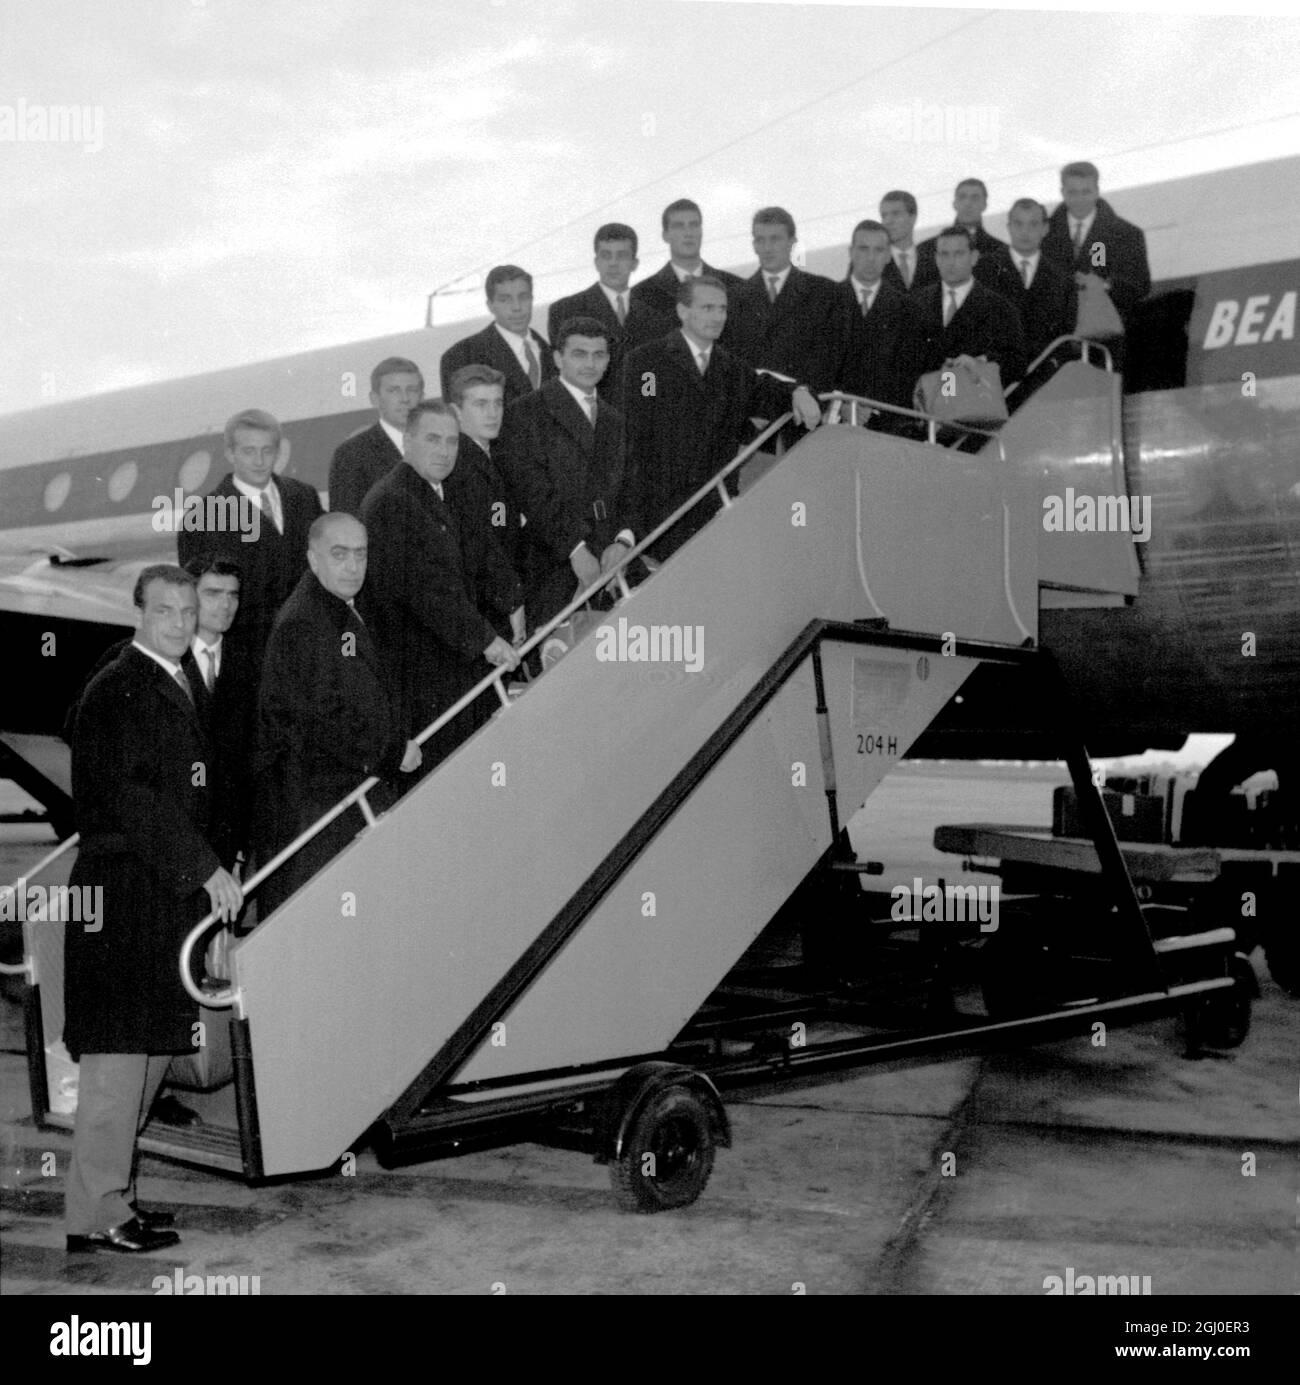 The Italian Football League Team seen on their arrival at London Airport on their way to Scotland. They are to meet the Scottish League in Glasgow. Four of the Italian team, Gerry Hitchens, Joe Baker, John Charles and Denis Law are British. 30th October 1961. Stock Photo